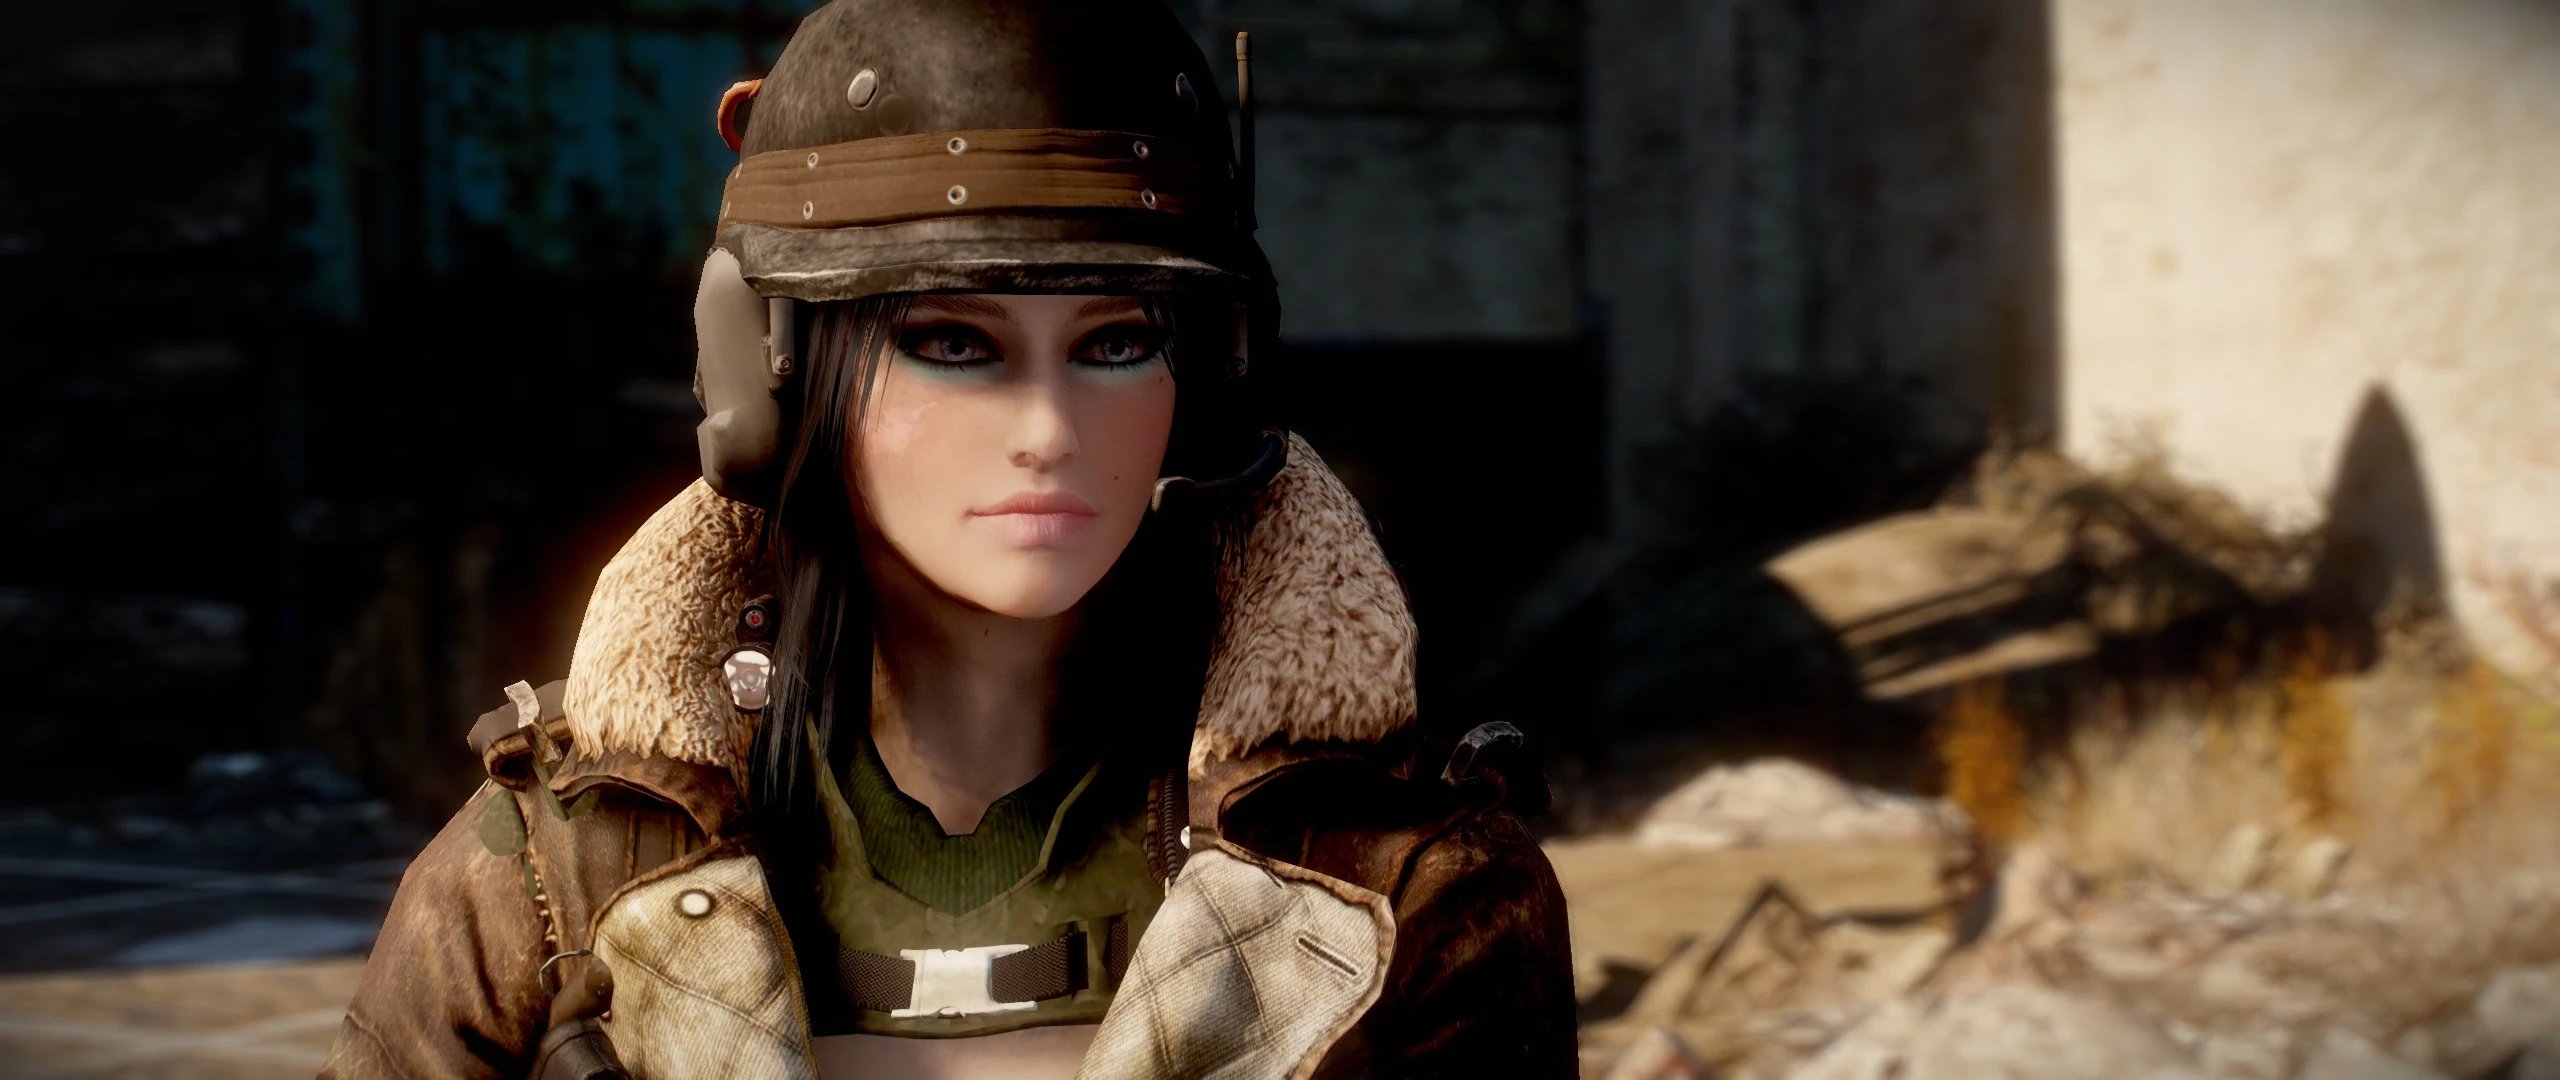 Kate from fallout 4 фото 24